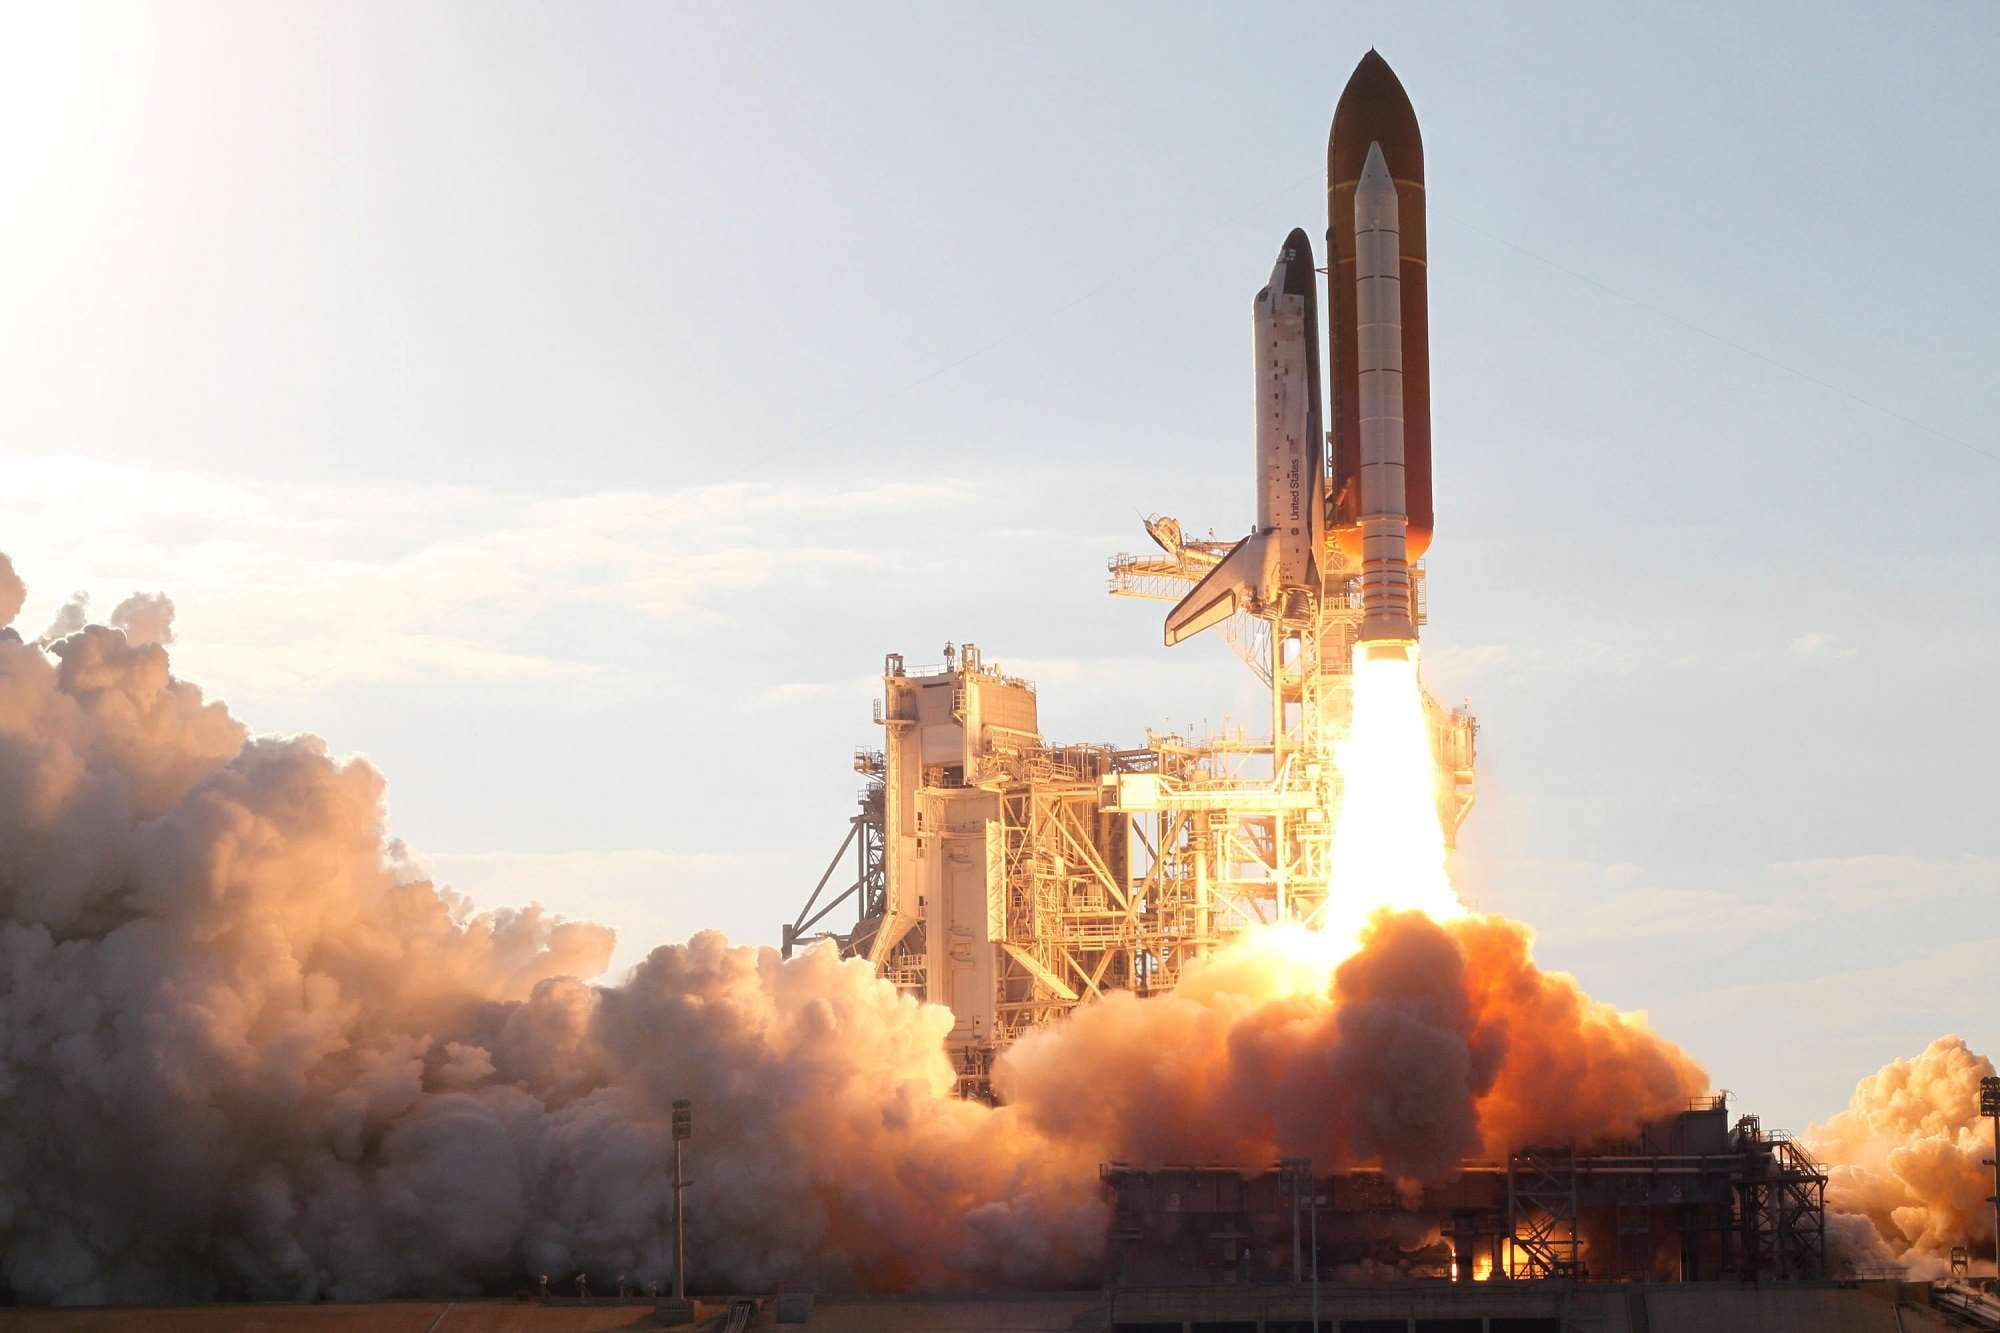 astronauts, blast off, discovery space shuttle, exploration